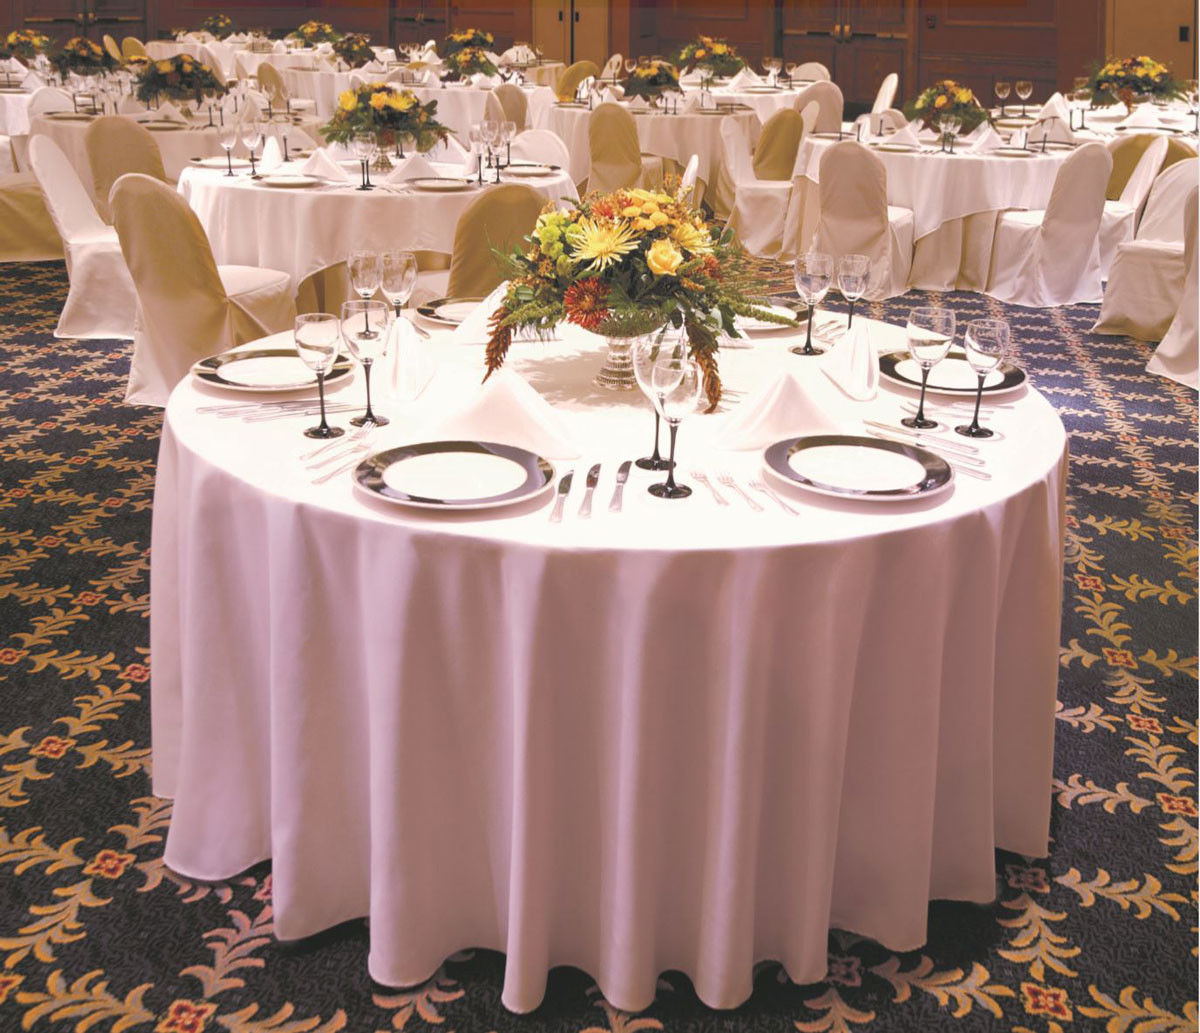 Will a 120" round table cloth from Horizon by Milliken enhance my event?